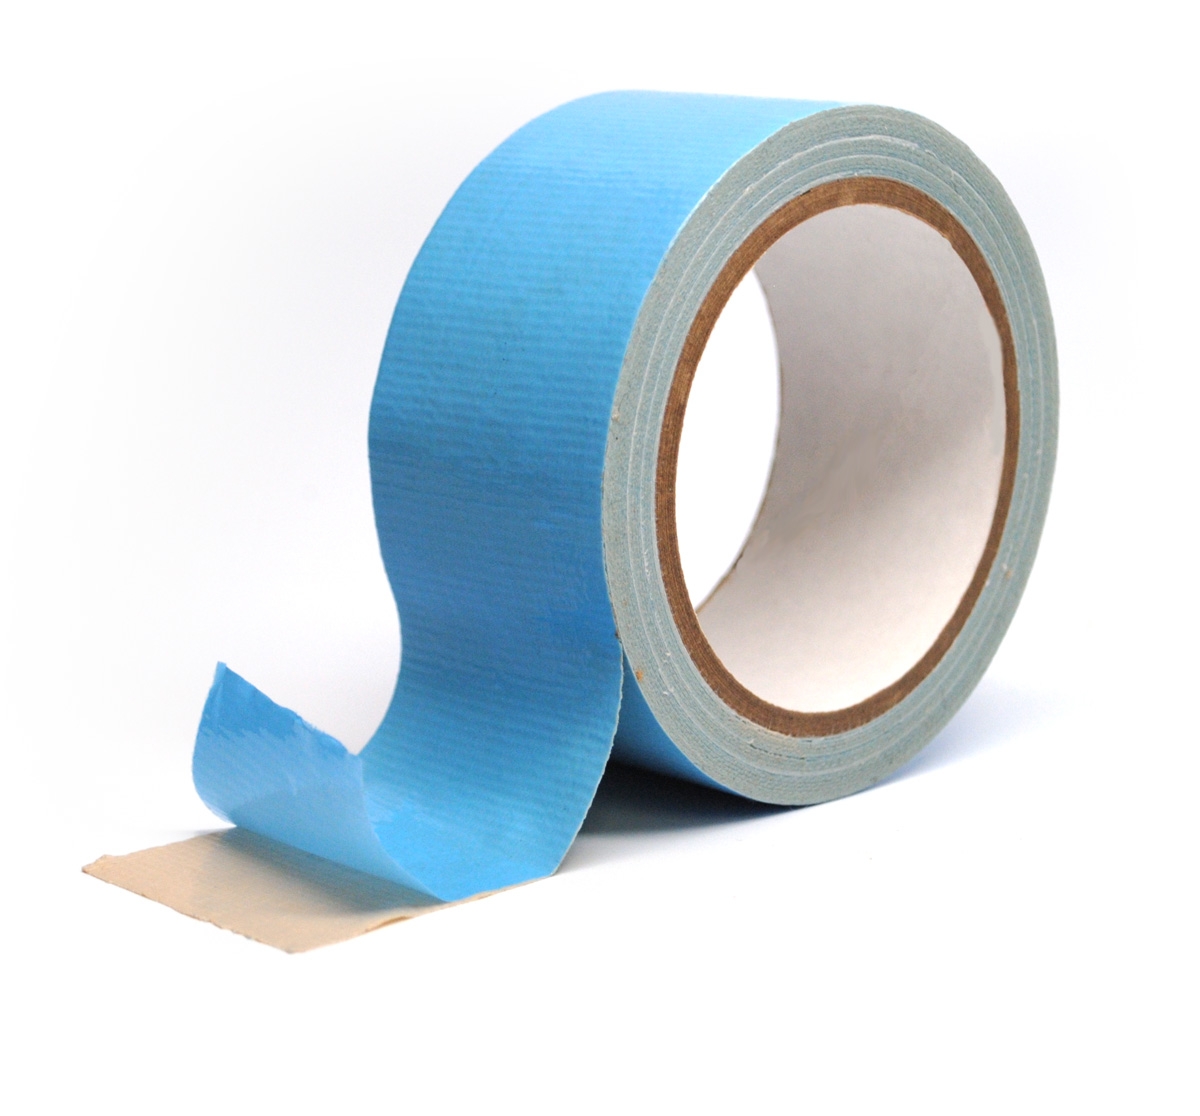 What Is A Carpet Tape